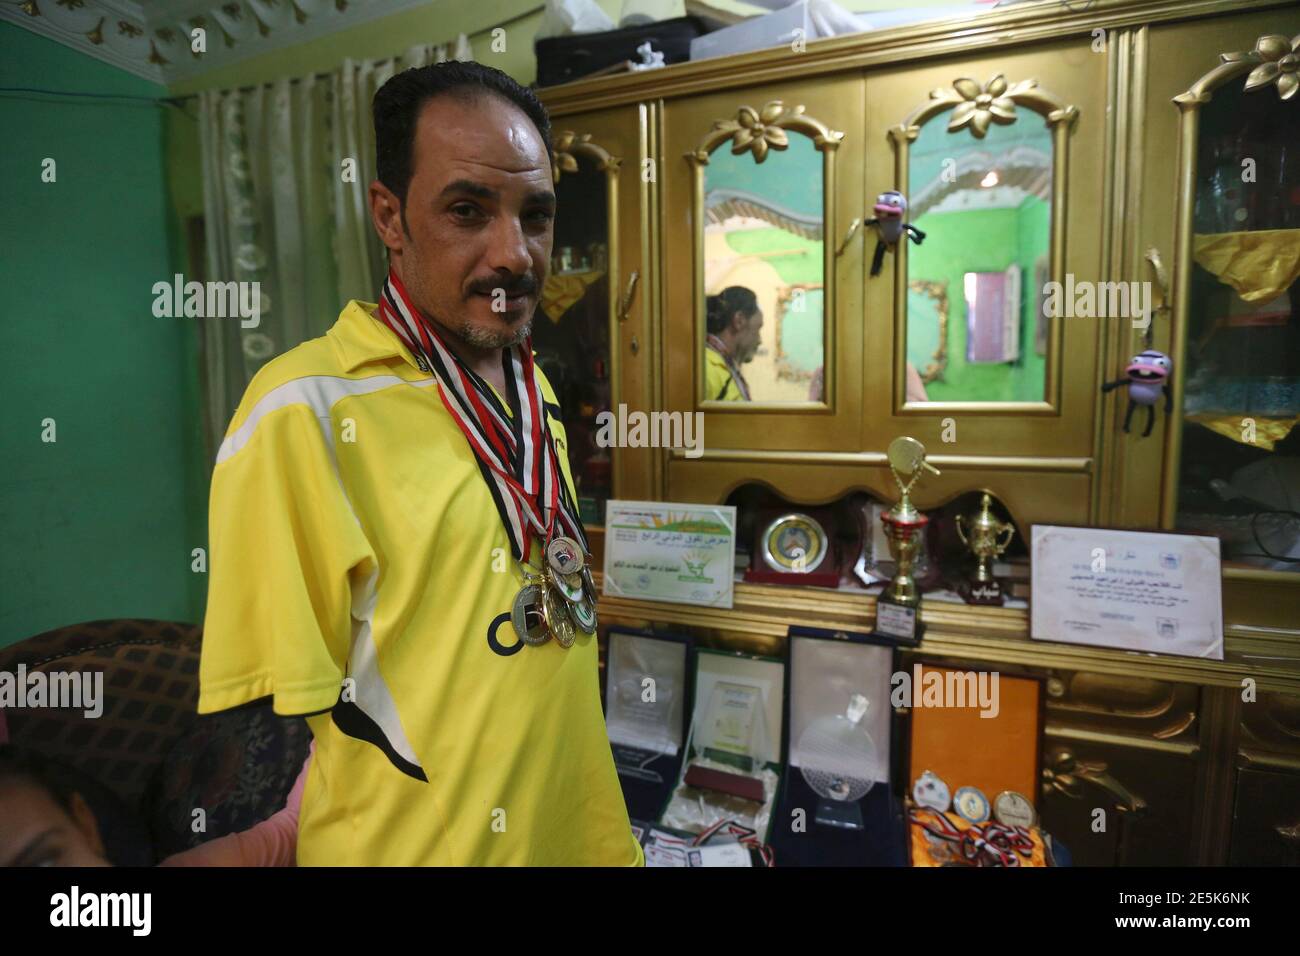 Disabled table tennis champion Ibrahim Hamato, 37, poses with his medals  and award from different tournaments, at his home in Domiat, northeast of  Cairo, September 28, 2014. Having lost both his arms